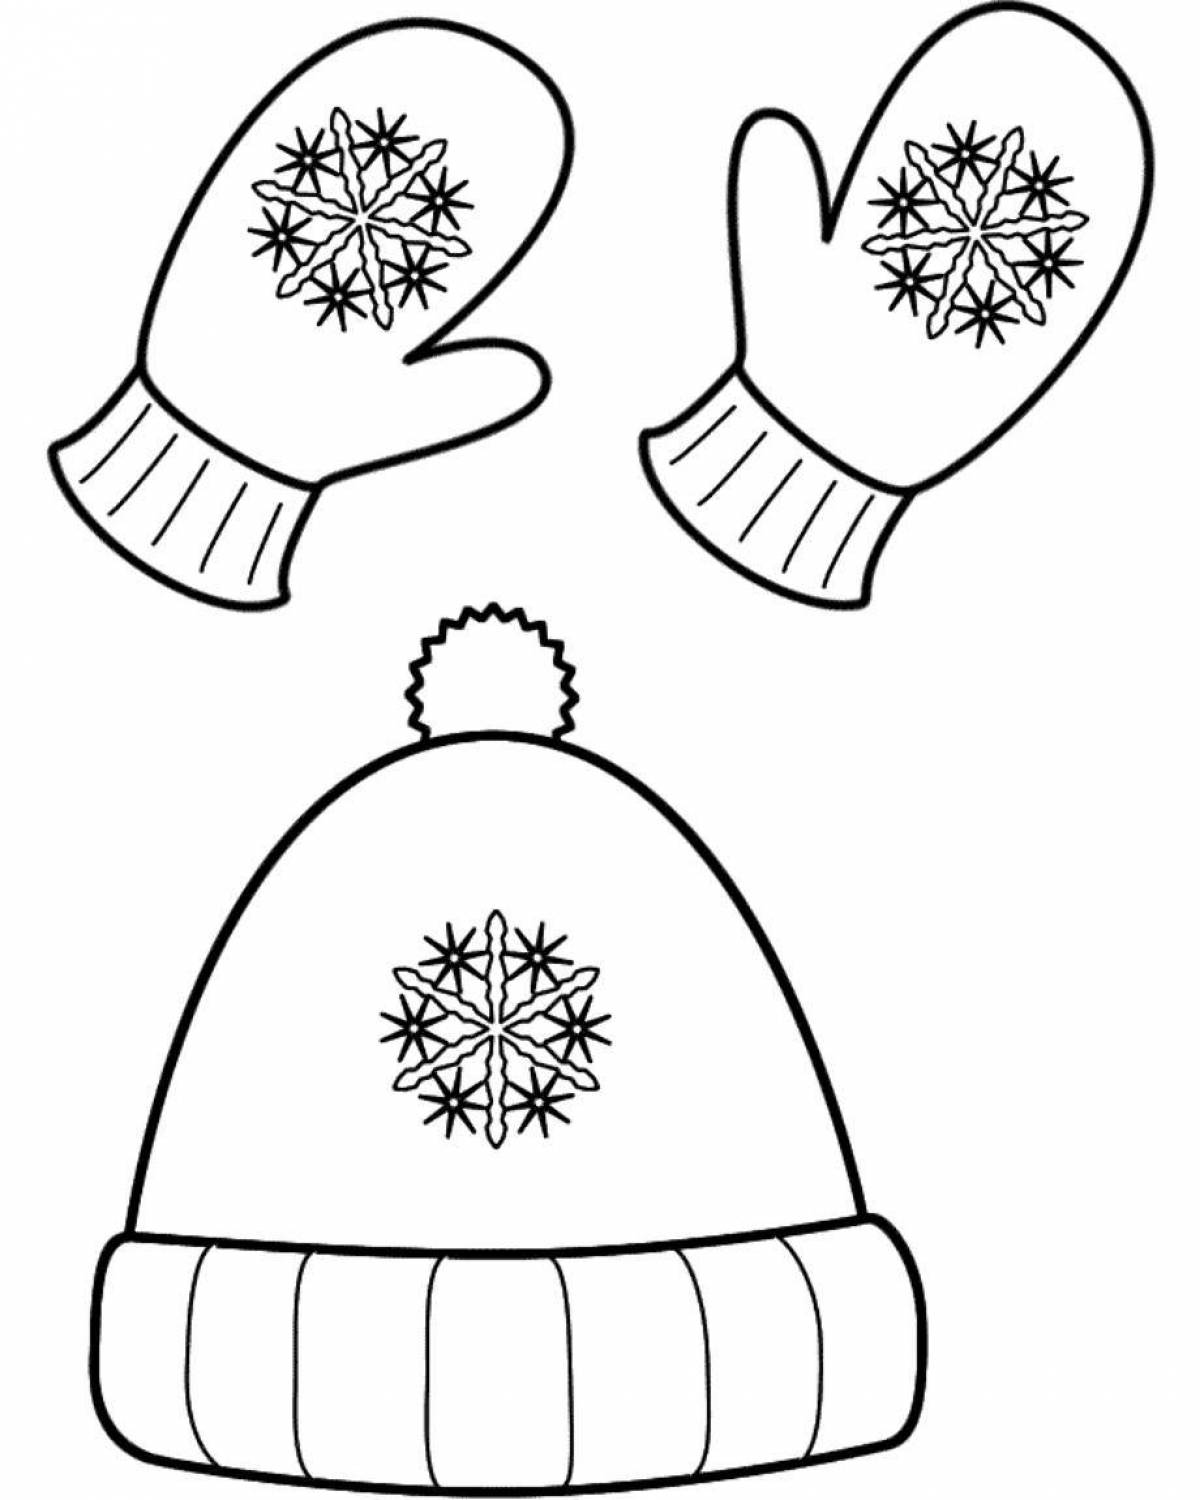 Adorable hat coloring book for 3-4 year olds